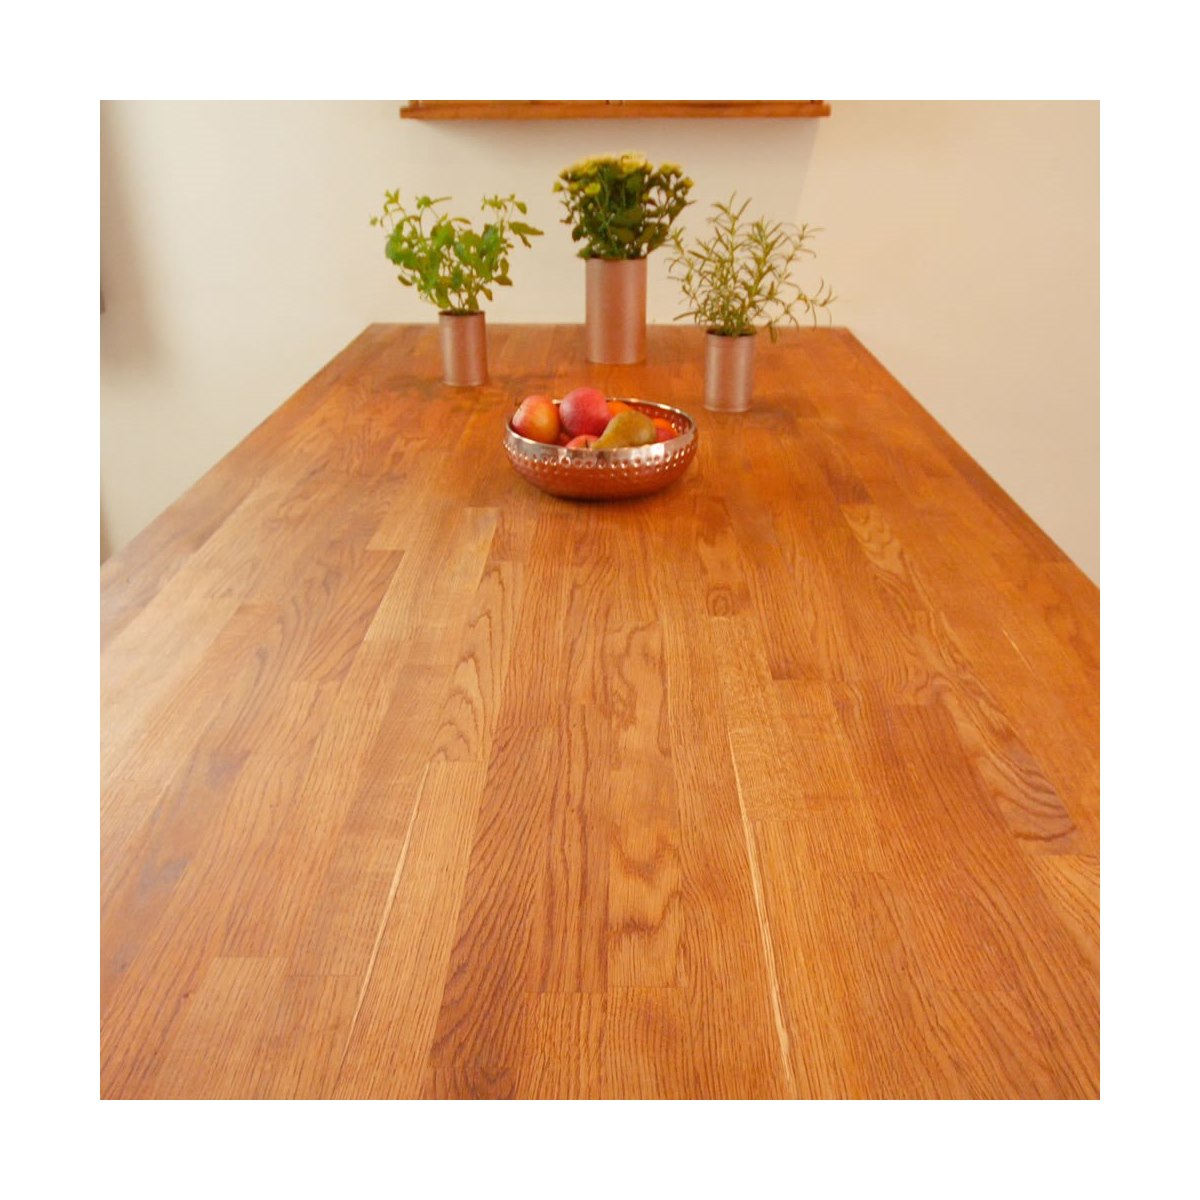 Danish Oil for Wood Work Surfaces